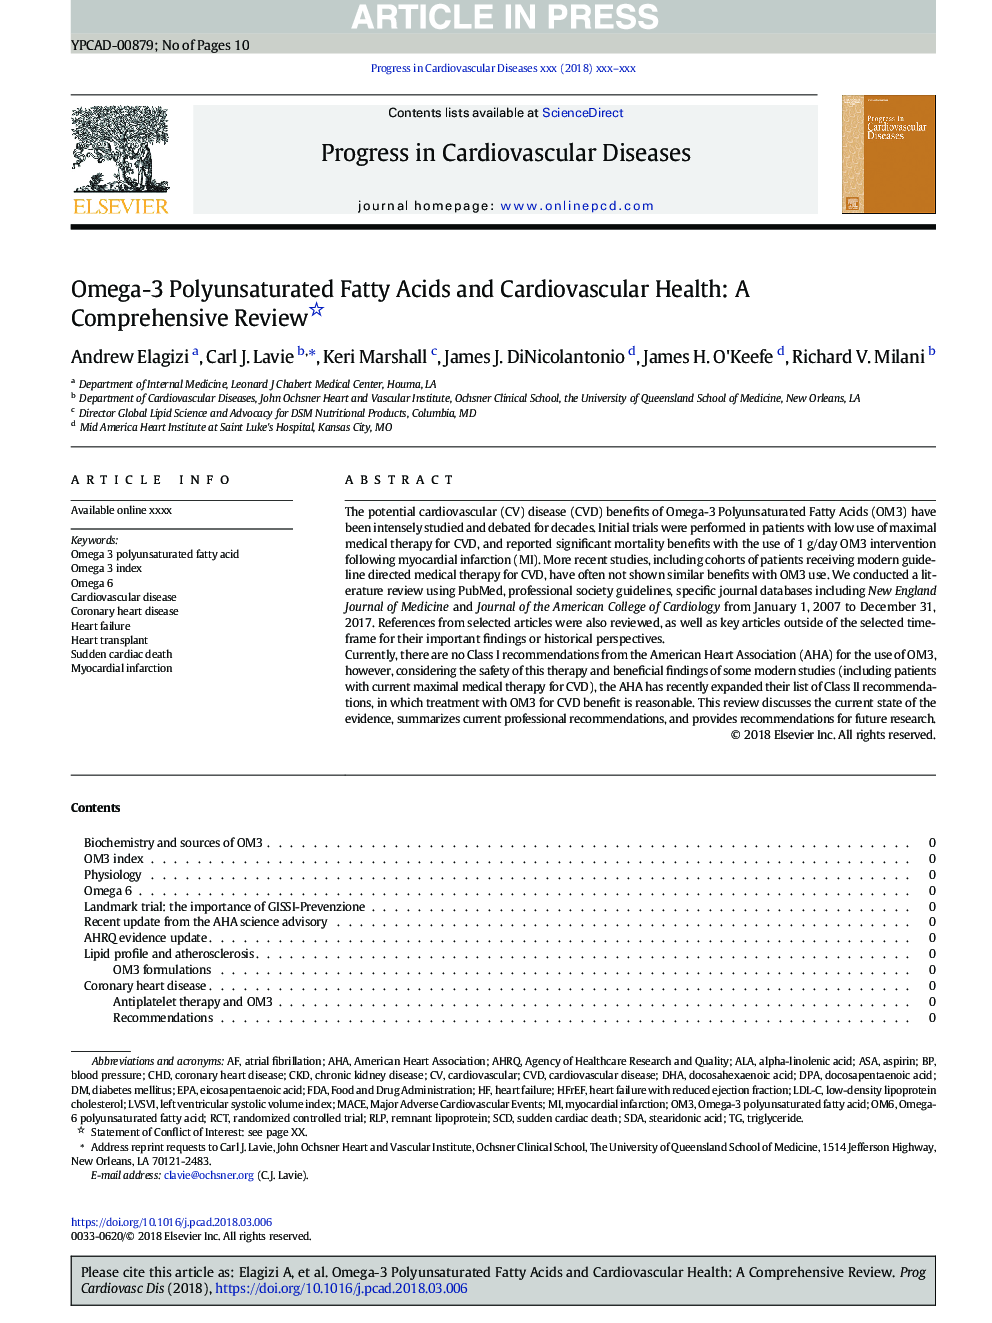 Omega-3 Polyunsaturated Fatty Acids and Cardiovascular Health: A Comprehensive Review